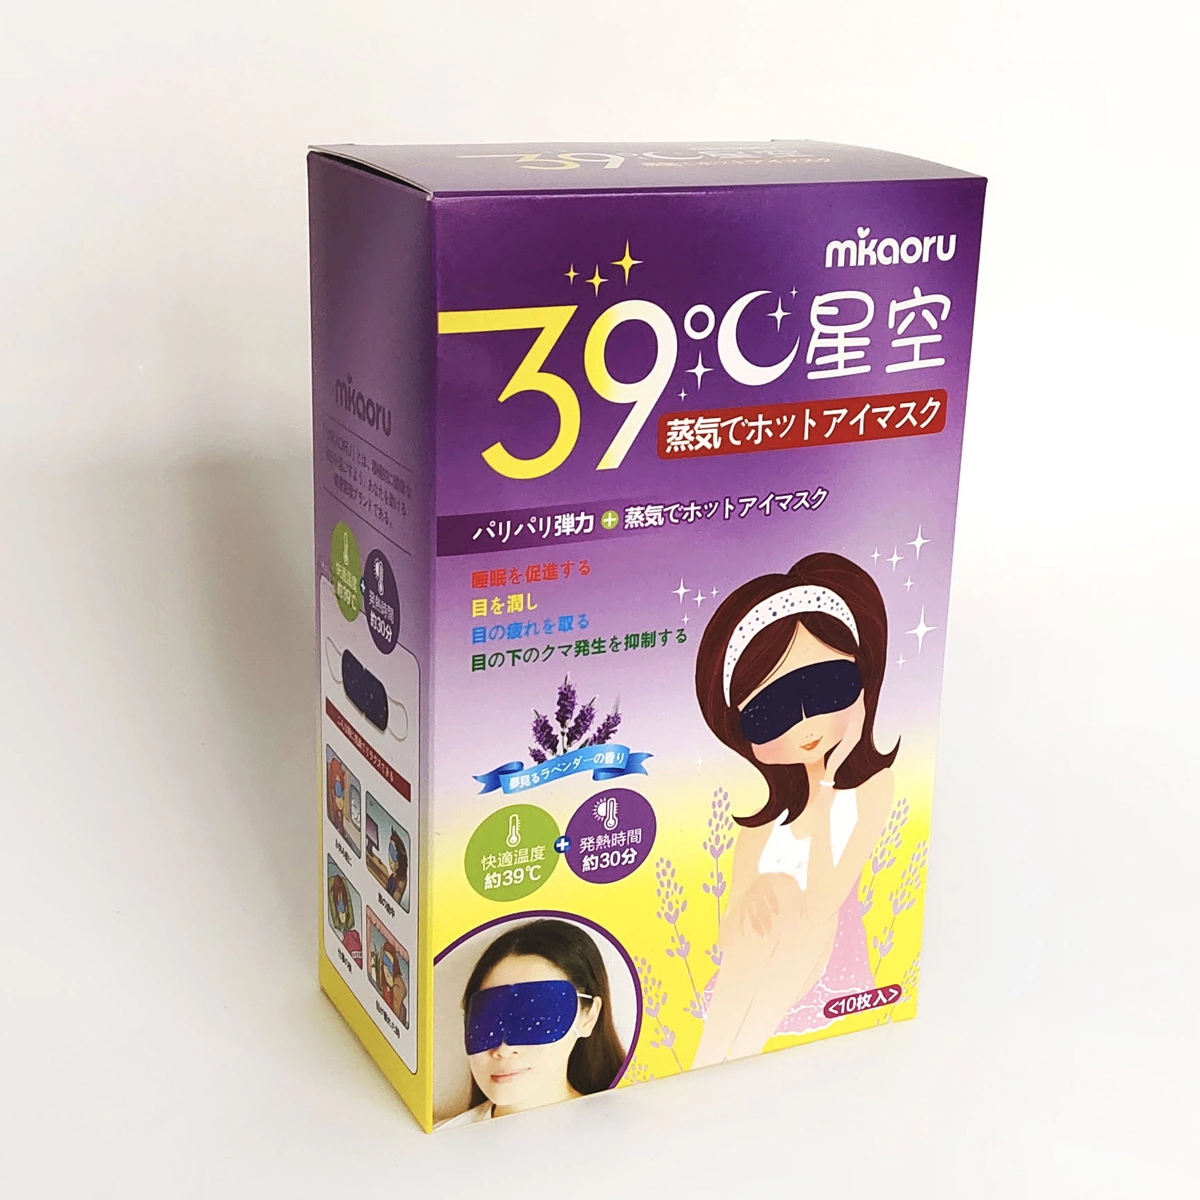 PB003 Blindfold Package Product Package Folding Box